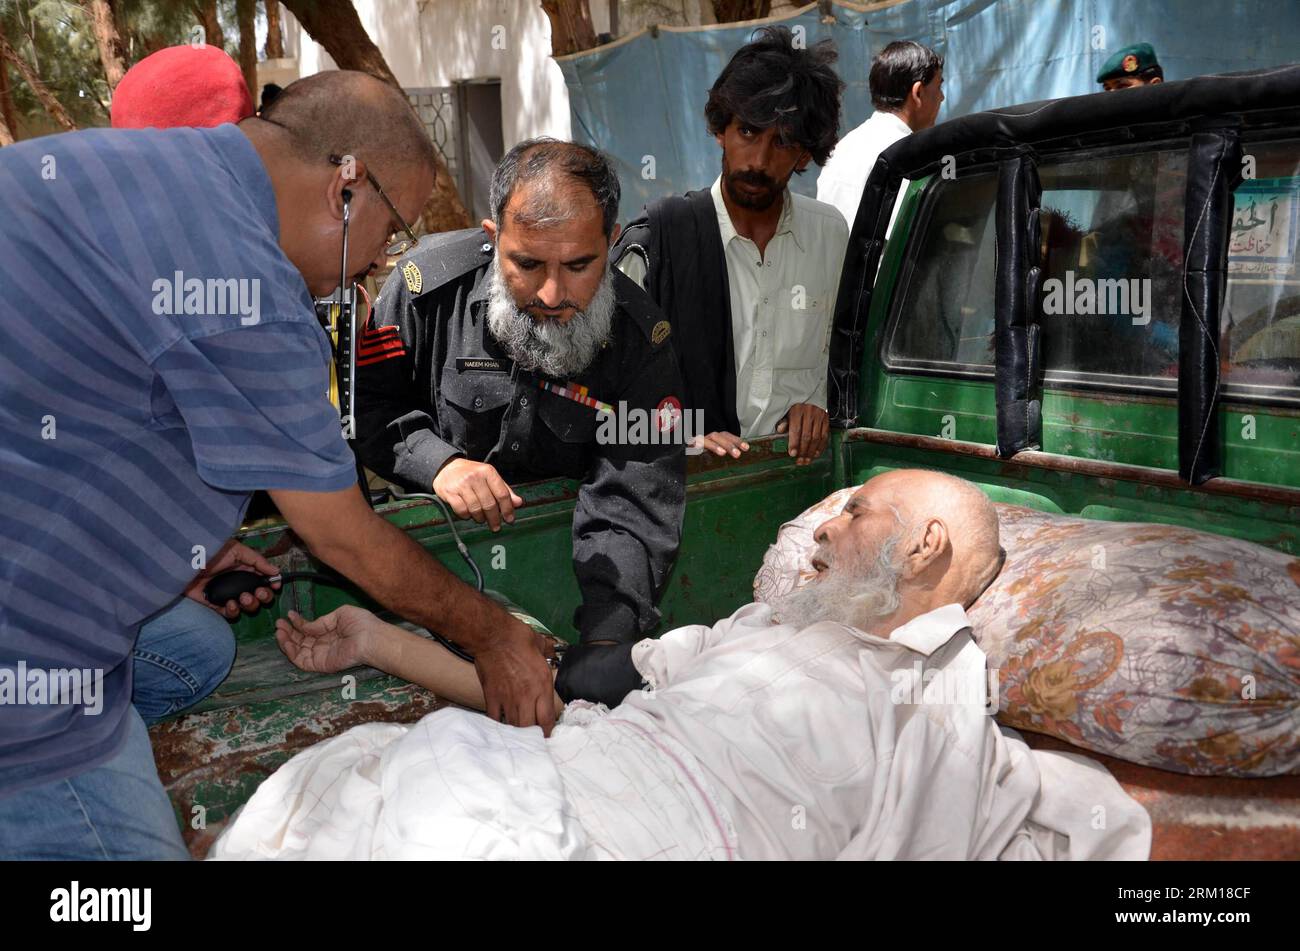 Bildnummer: 59536899  Datum: 17.04.2013  Copyright: imago/Xinhua (130418) -- MASHKEL, April 18, 2013 (Xinhua) -- Pakistani army doctors examine an earthquake survivor at a military field hospital in southwest Pakistan s Mashkel on April 17, 2013. The Pakistani authorities on Thursday said that rescue operations had been sped up in areas affected by the Tuesday s 7.9 magnitude earthquake in the country s southwestern province of Balochistan near Pak-Iran border. According to the official figures, at least 40 were killed and over 300 others injured when tremors jolted the Mashkel area of Washuk Stock Photo